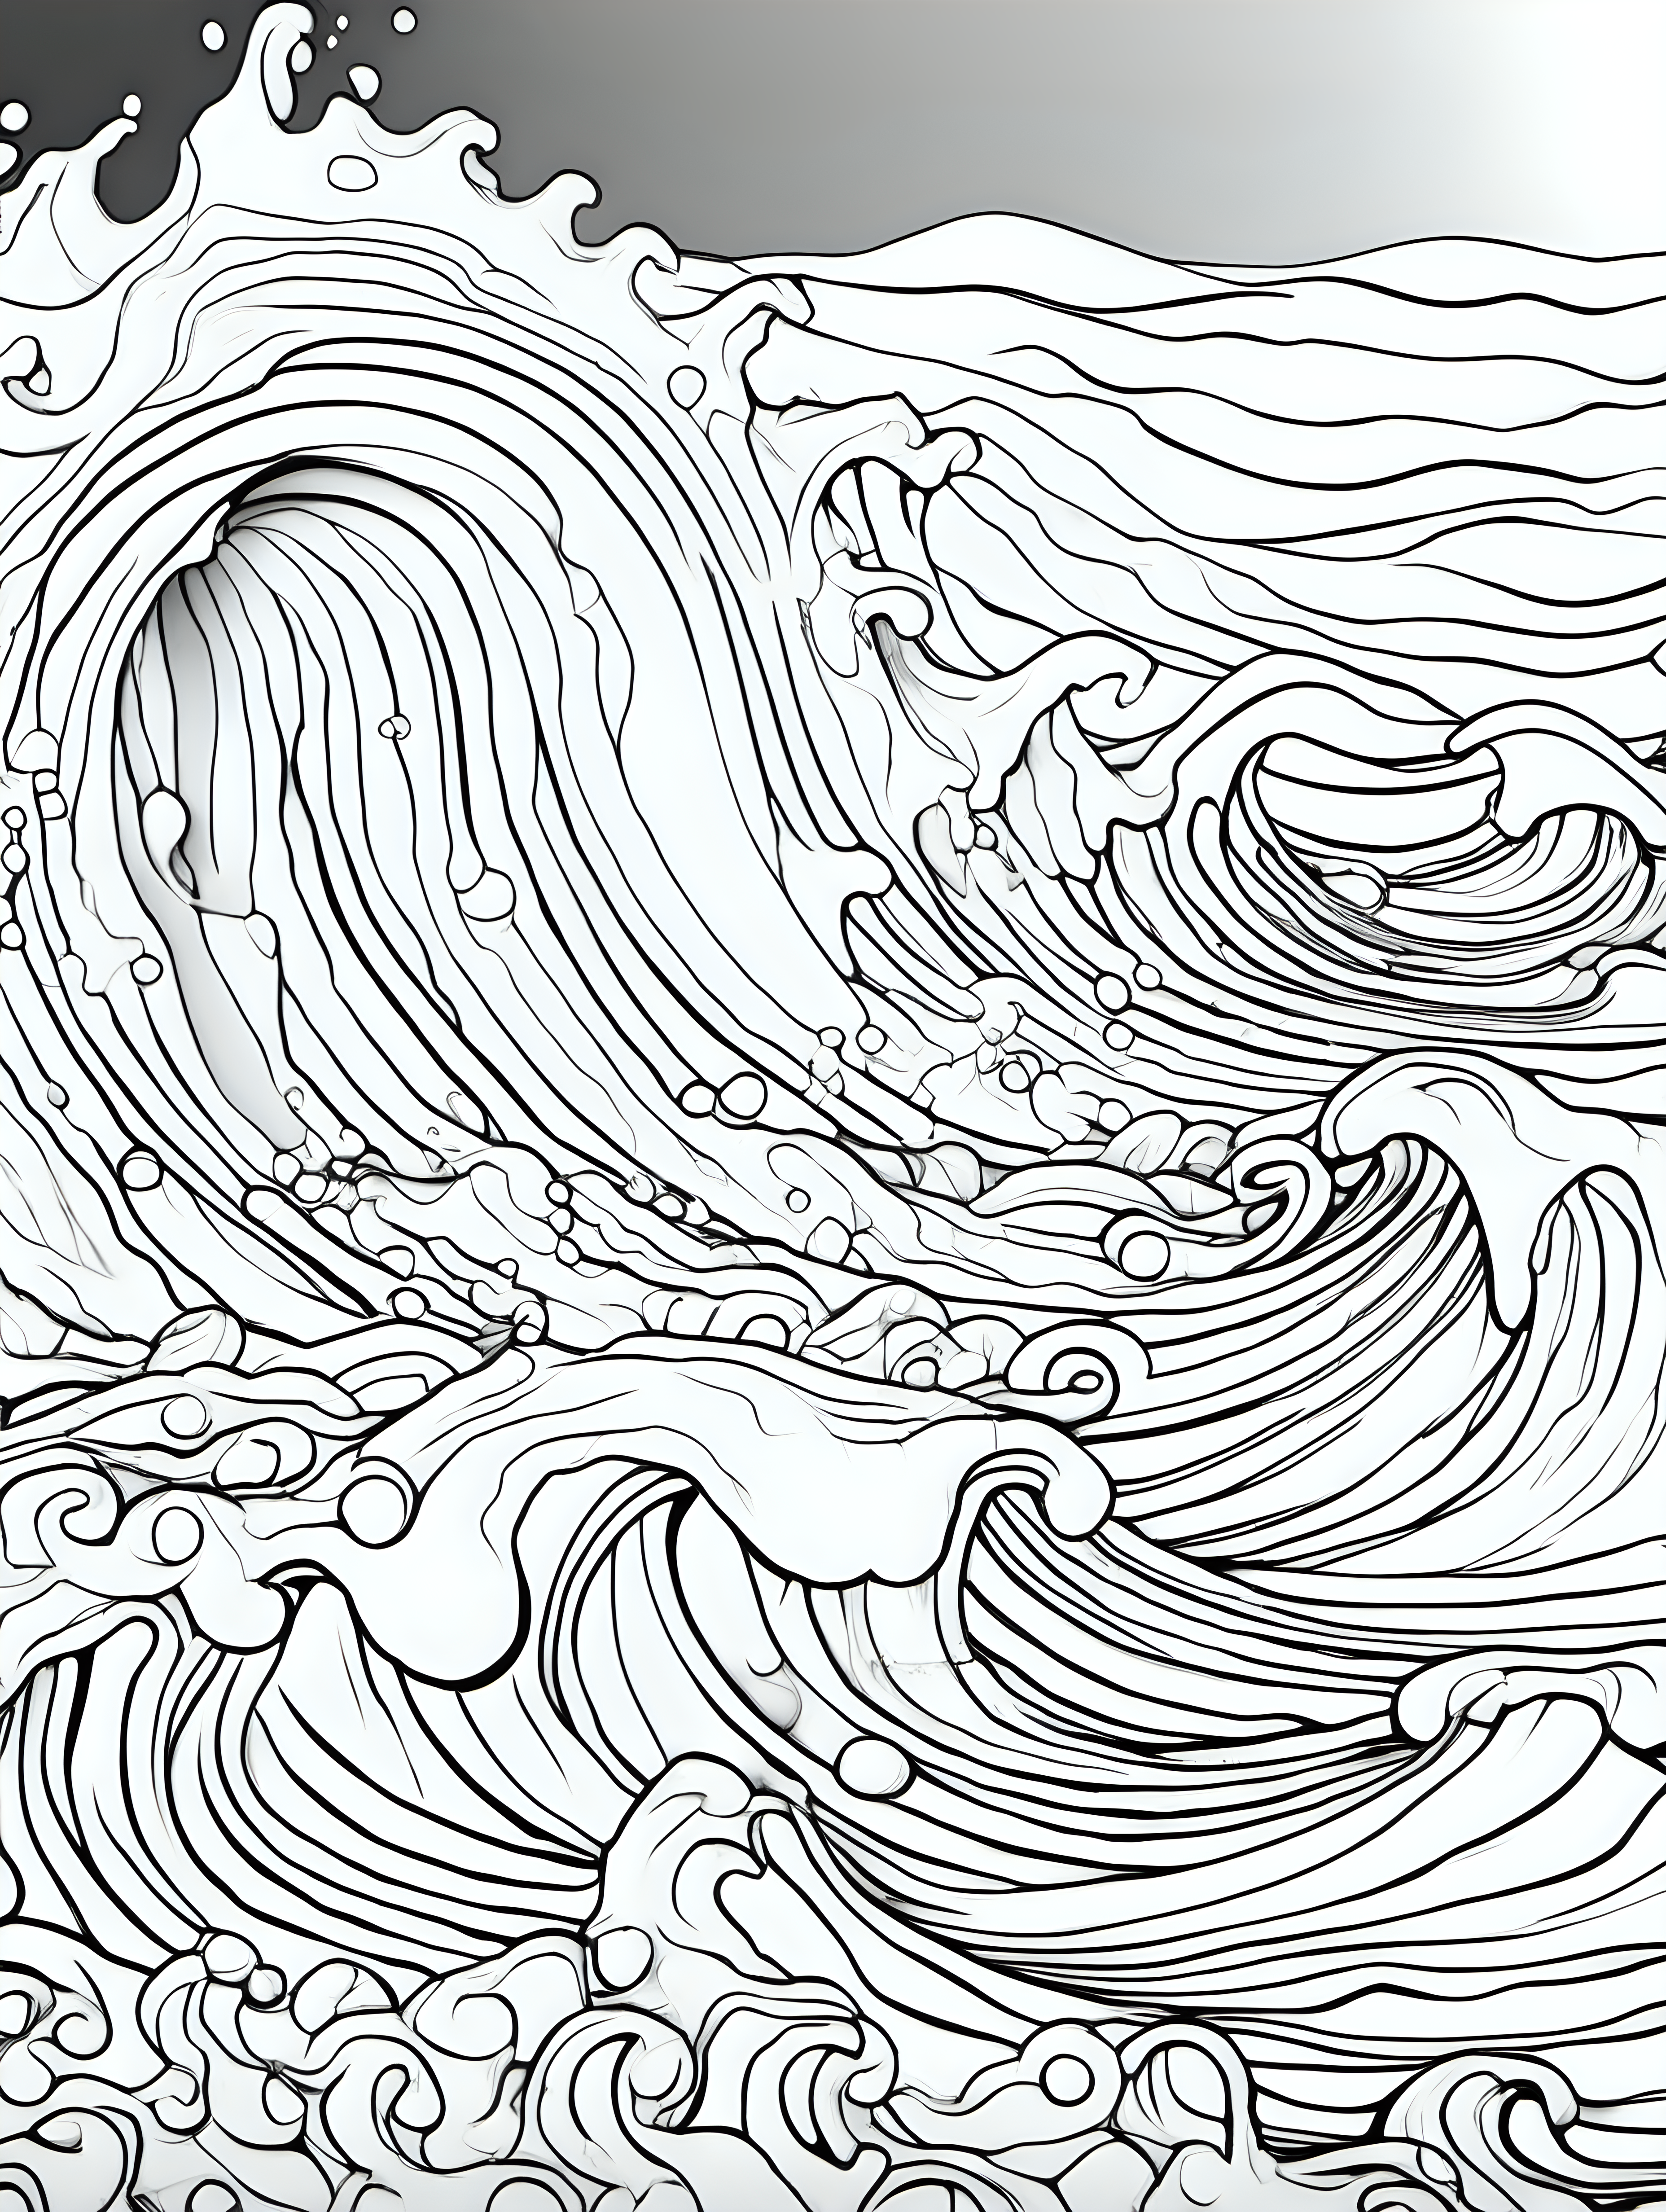 ocean waves paint pouring cells coloring page no